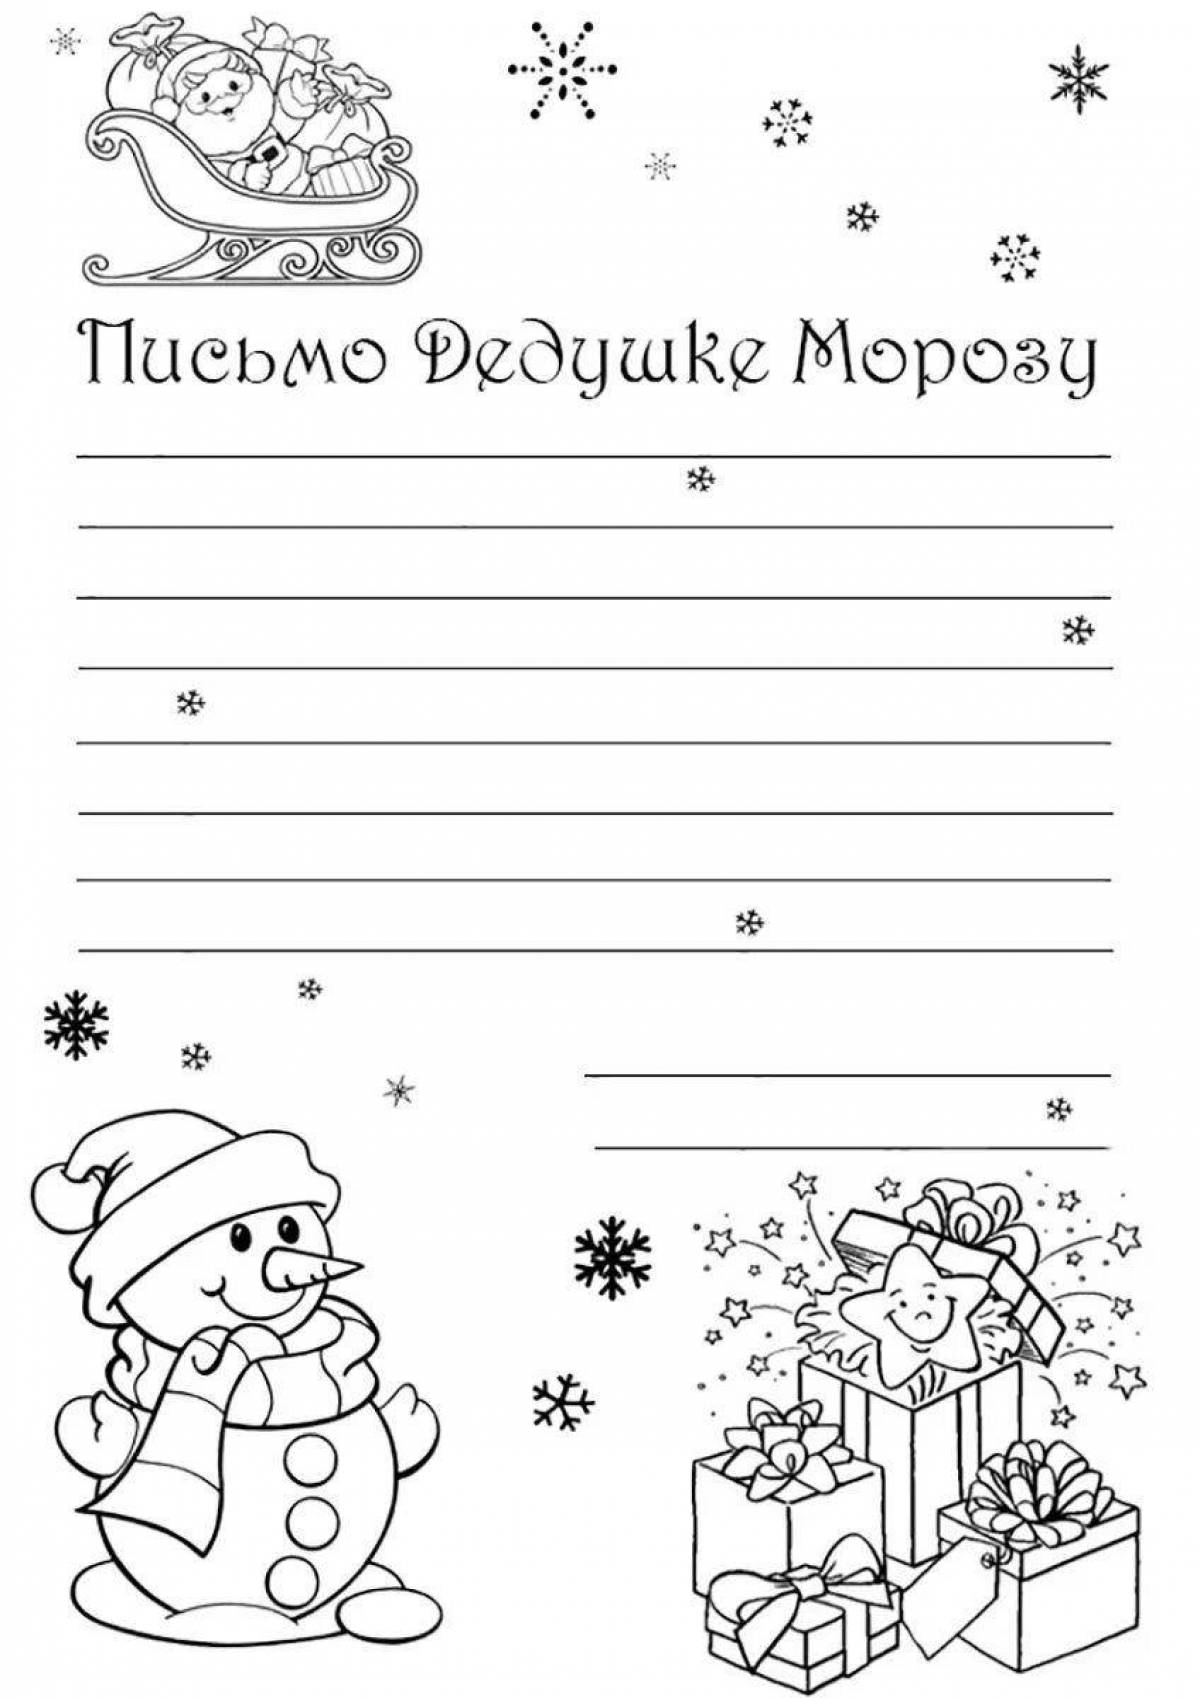 Delightful coloring letter to Santa Claus